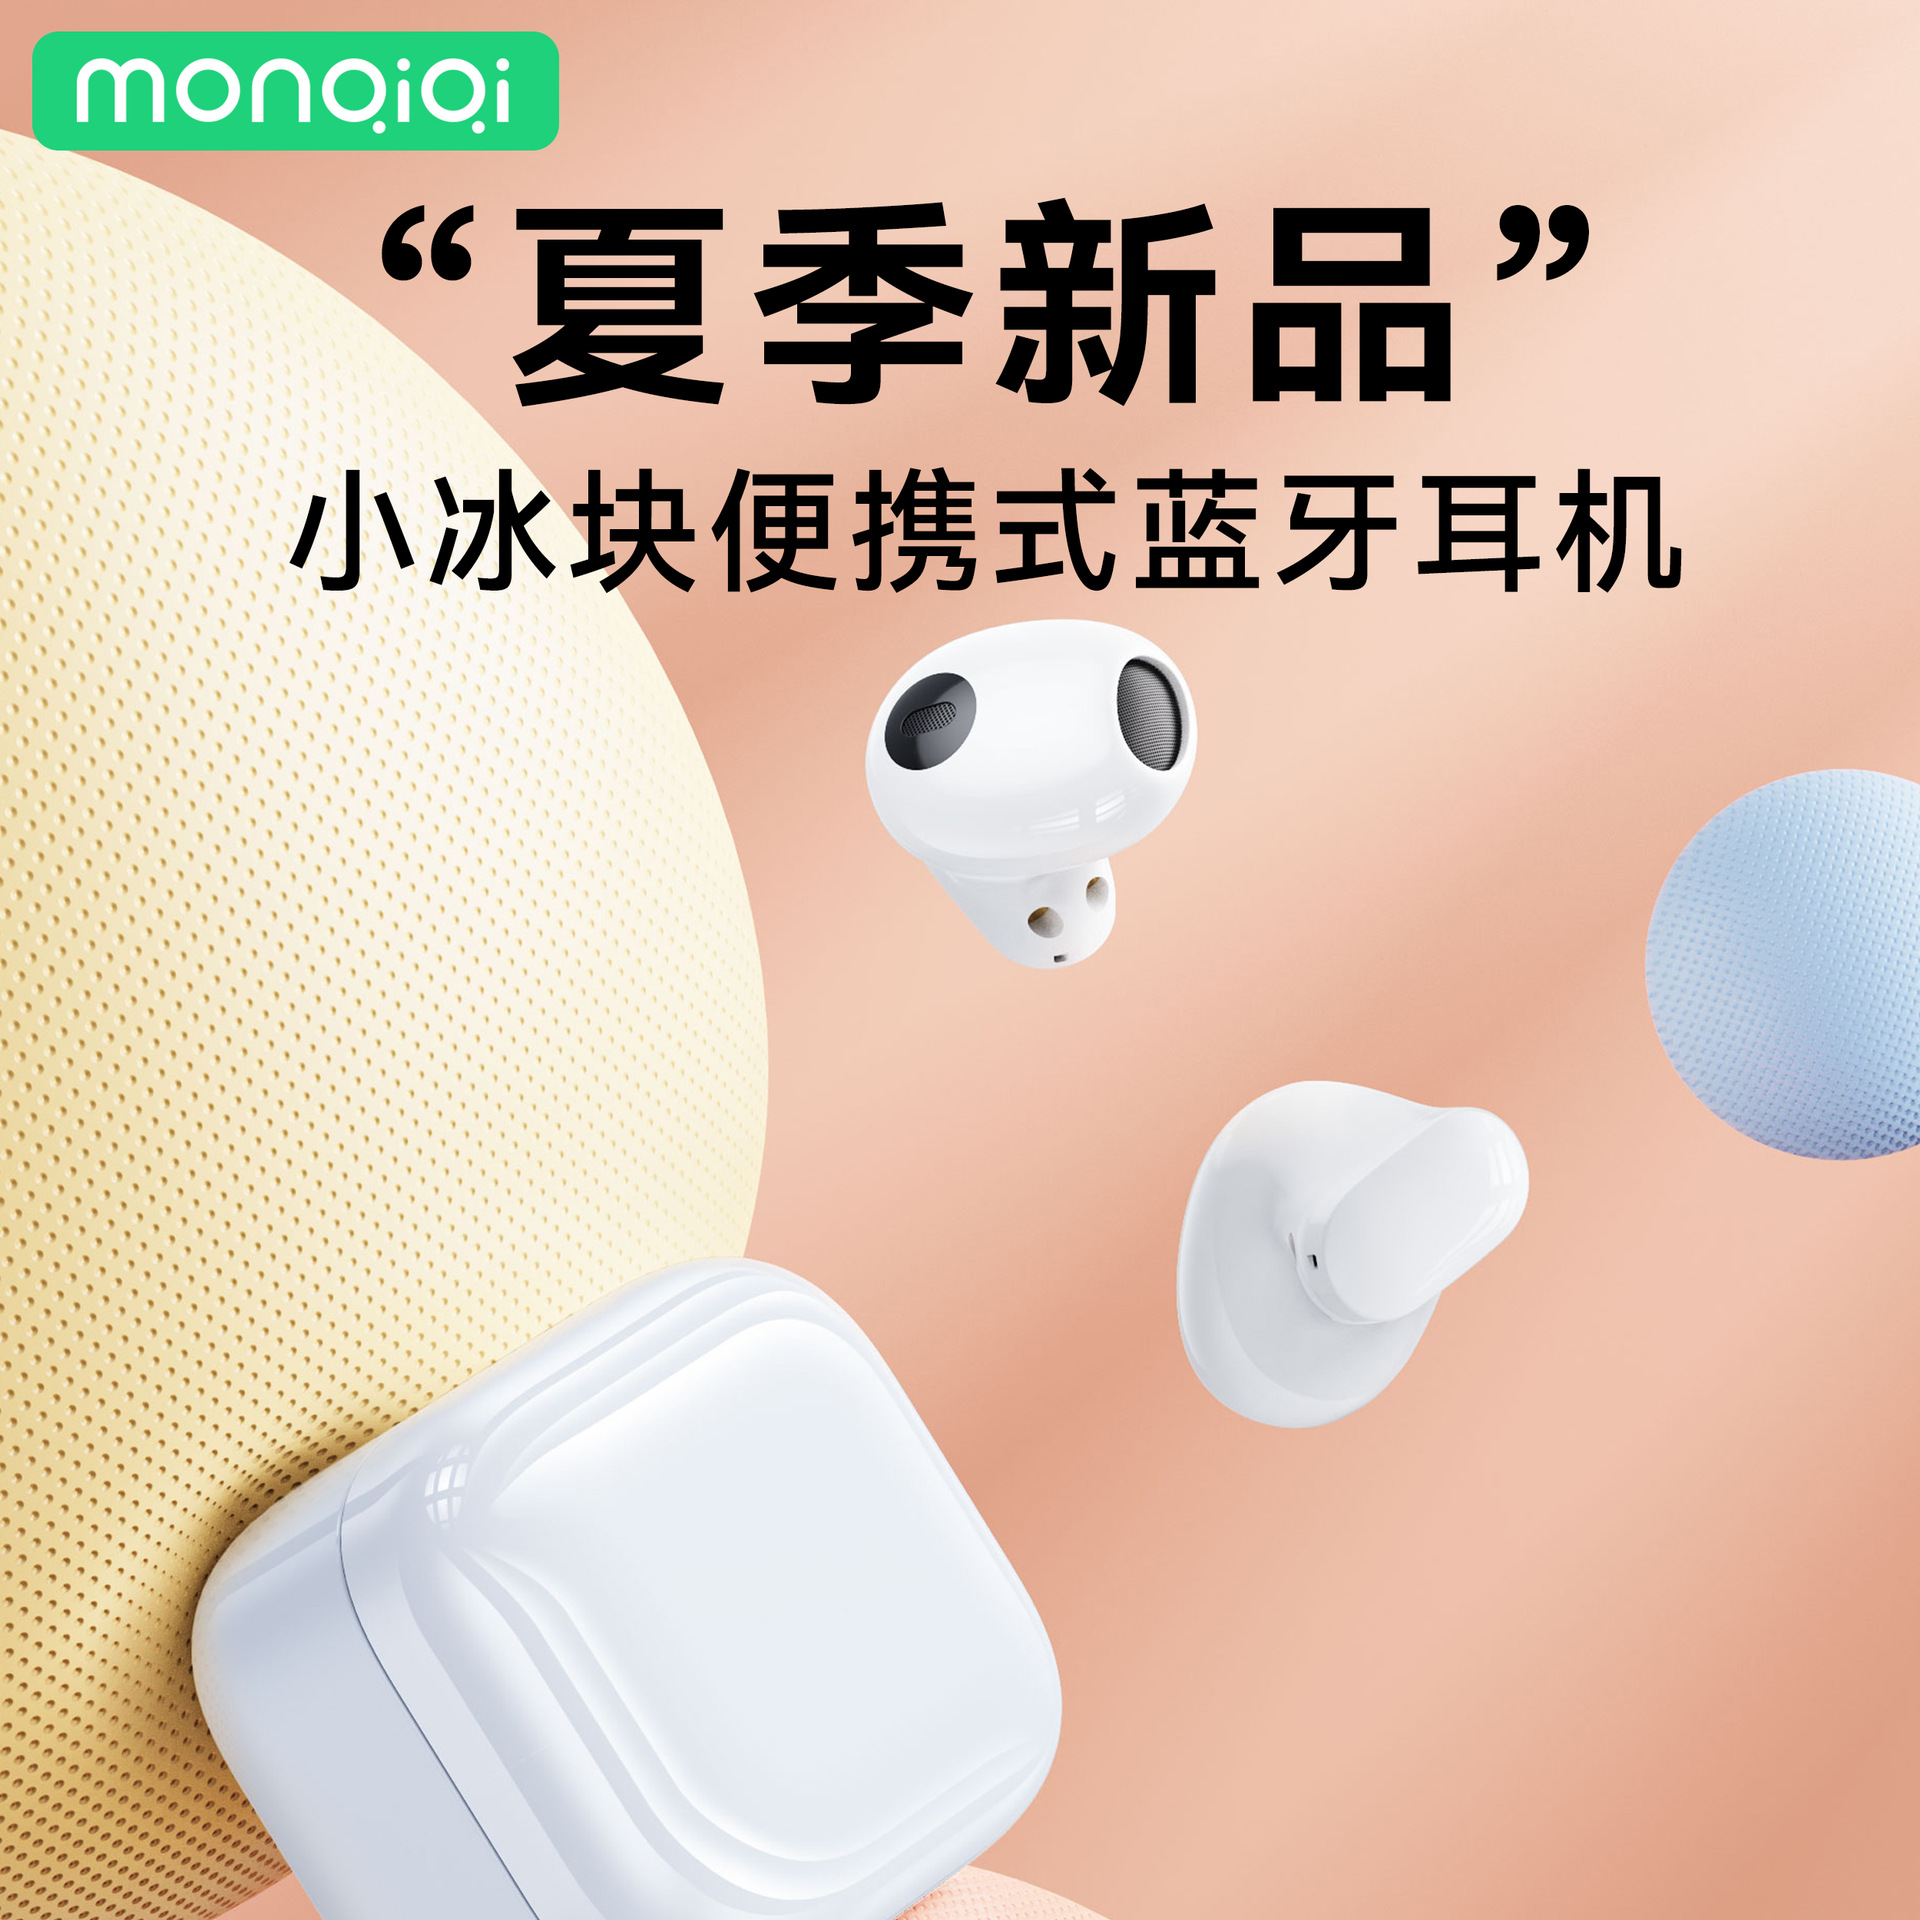 Monqiqi Menqiqi Small Ice Cube Wireless Bluetooth Earphone in-Ear Super Large Battery Long Battery Life Generation New Product